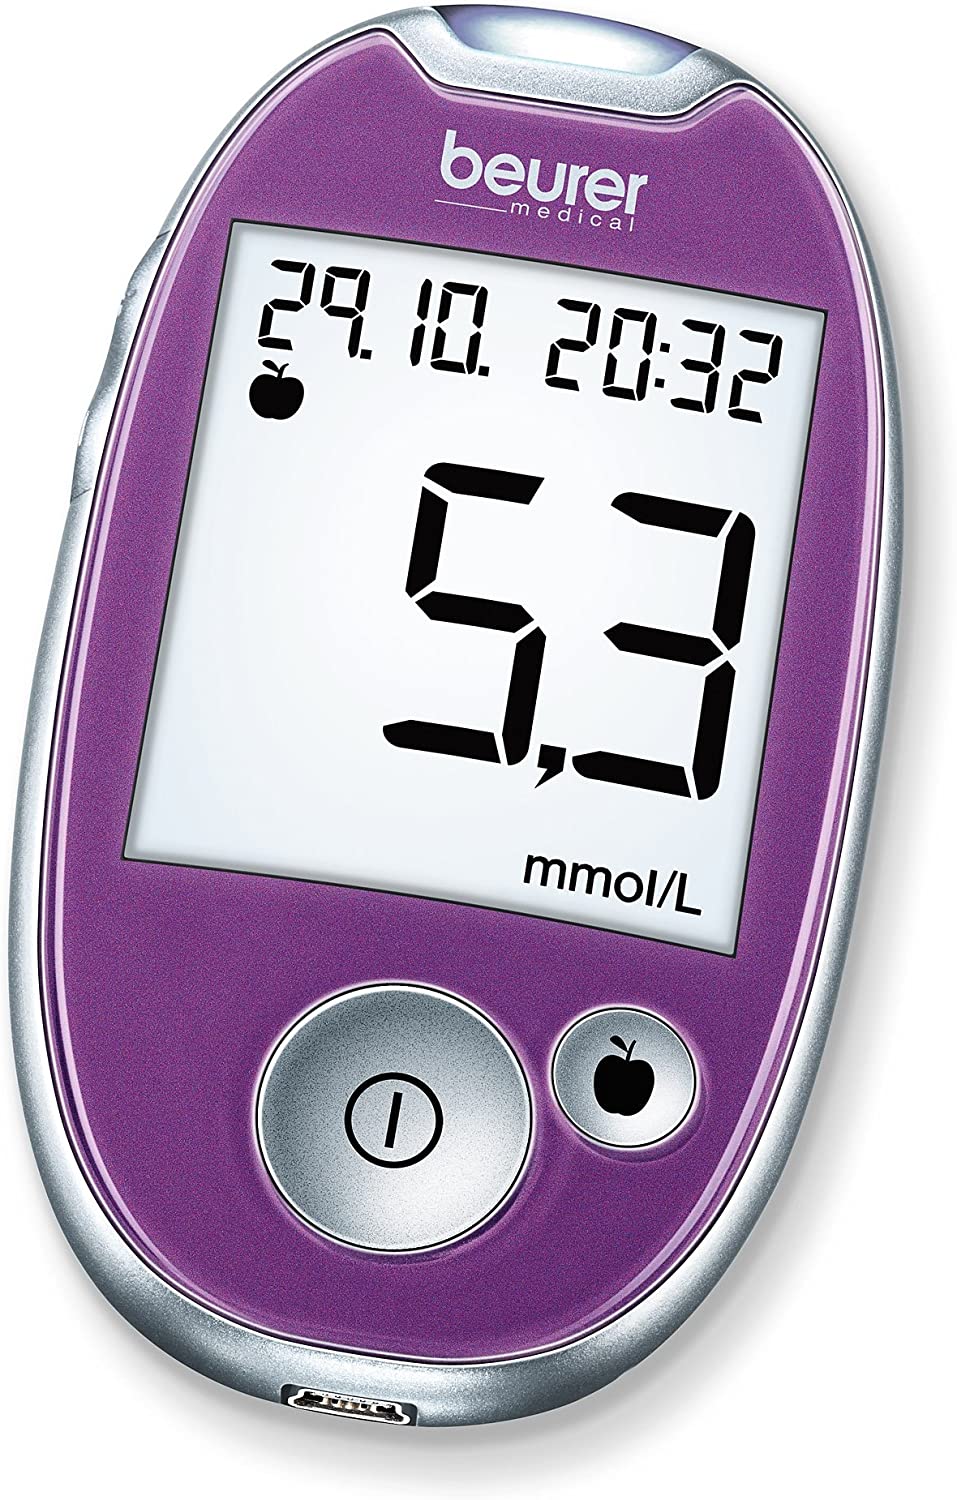 Beurer GL 44 Blood Glucose Monitor mmol/l (Purple, Safe Blood Sugar Measurement with Wide Test Strips and Blood Quantity Control, Compatible with HealthManager Software or App)